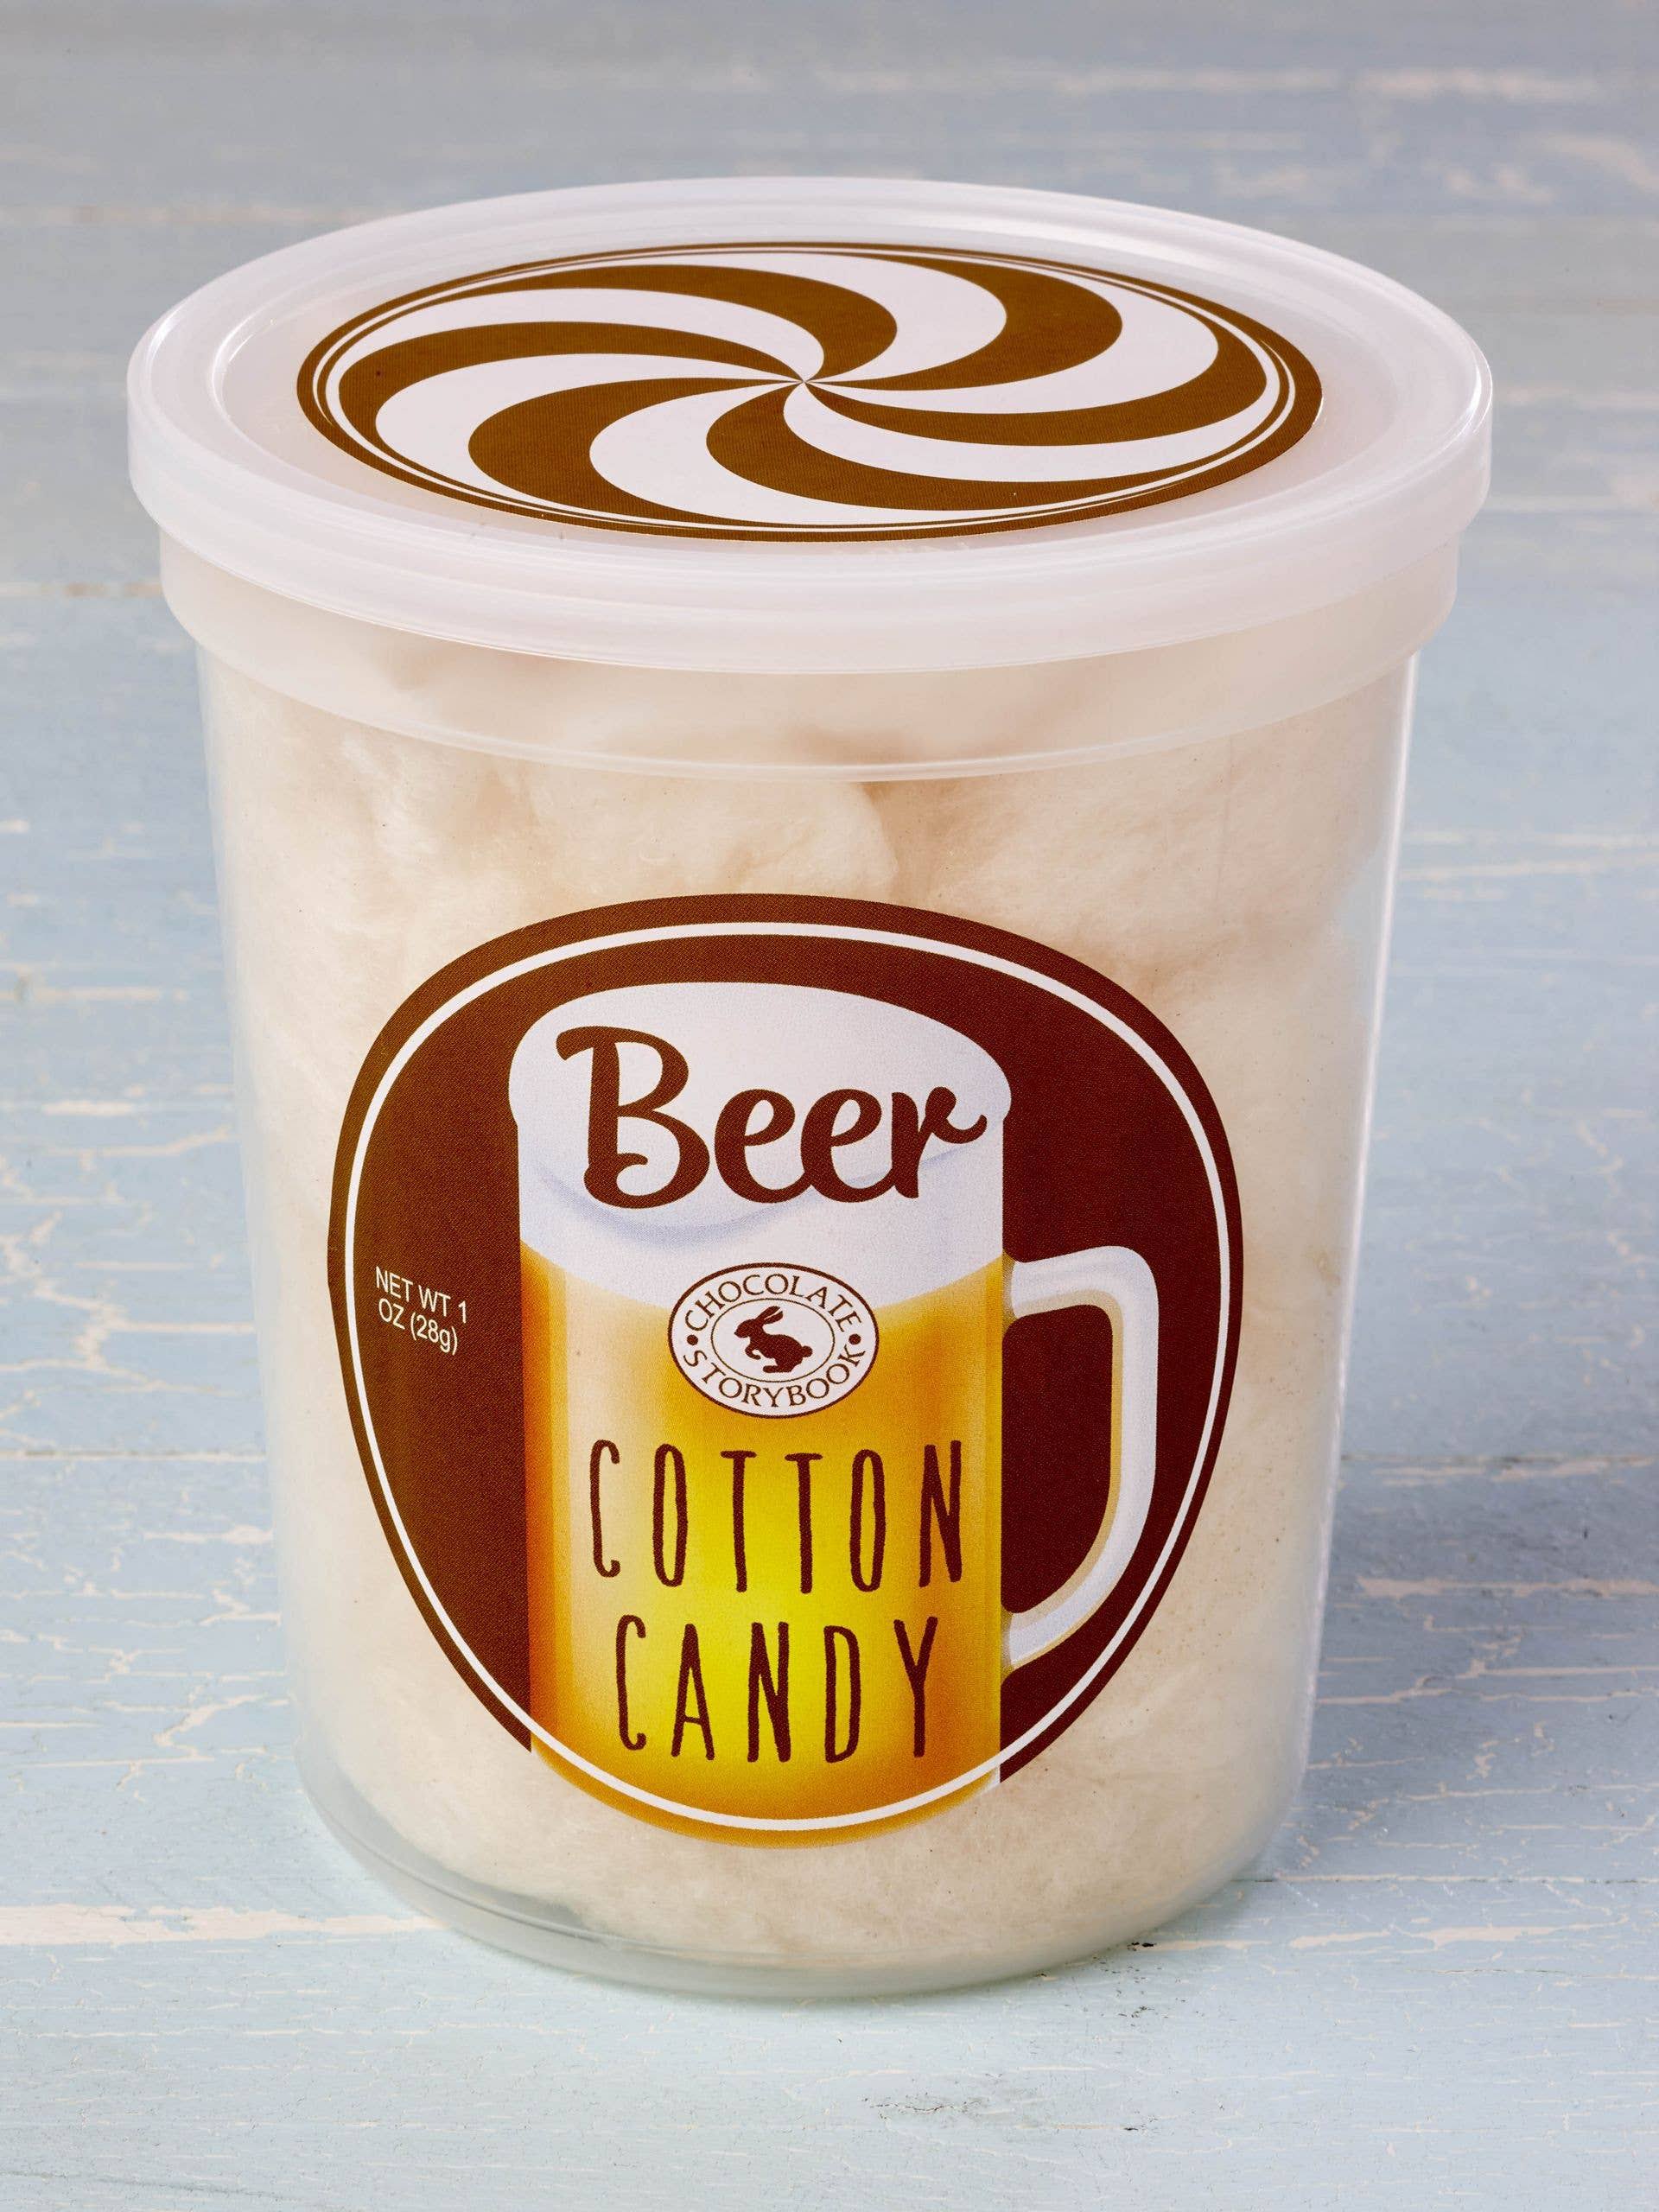 Chocolate Story Book Beer Cotton Candy - 1oz